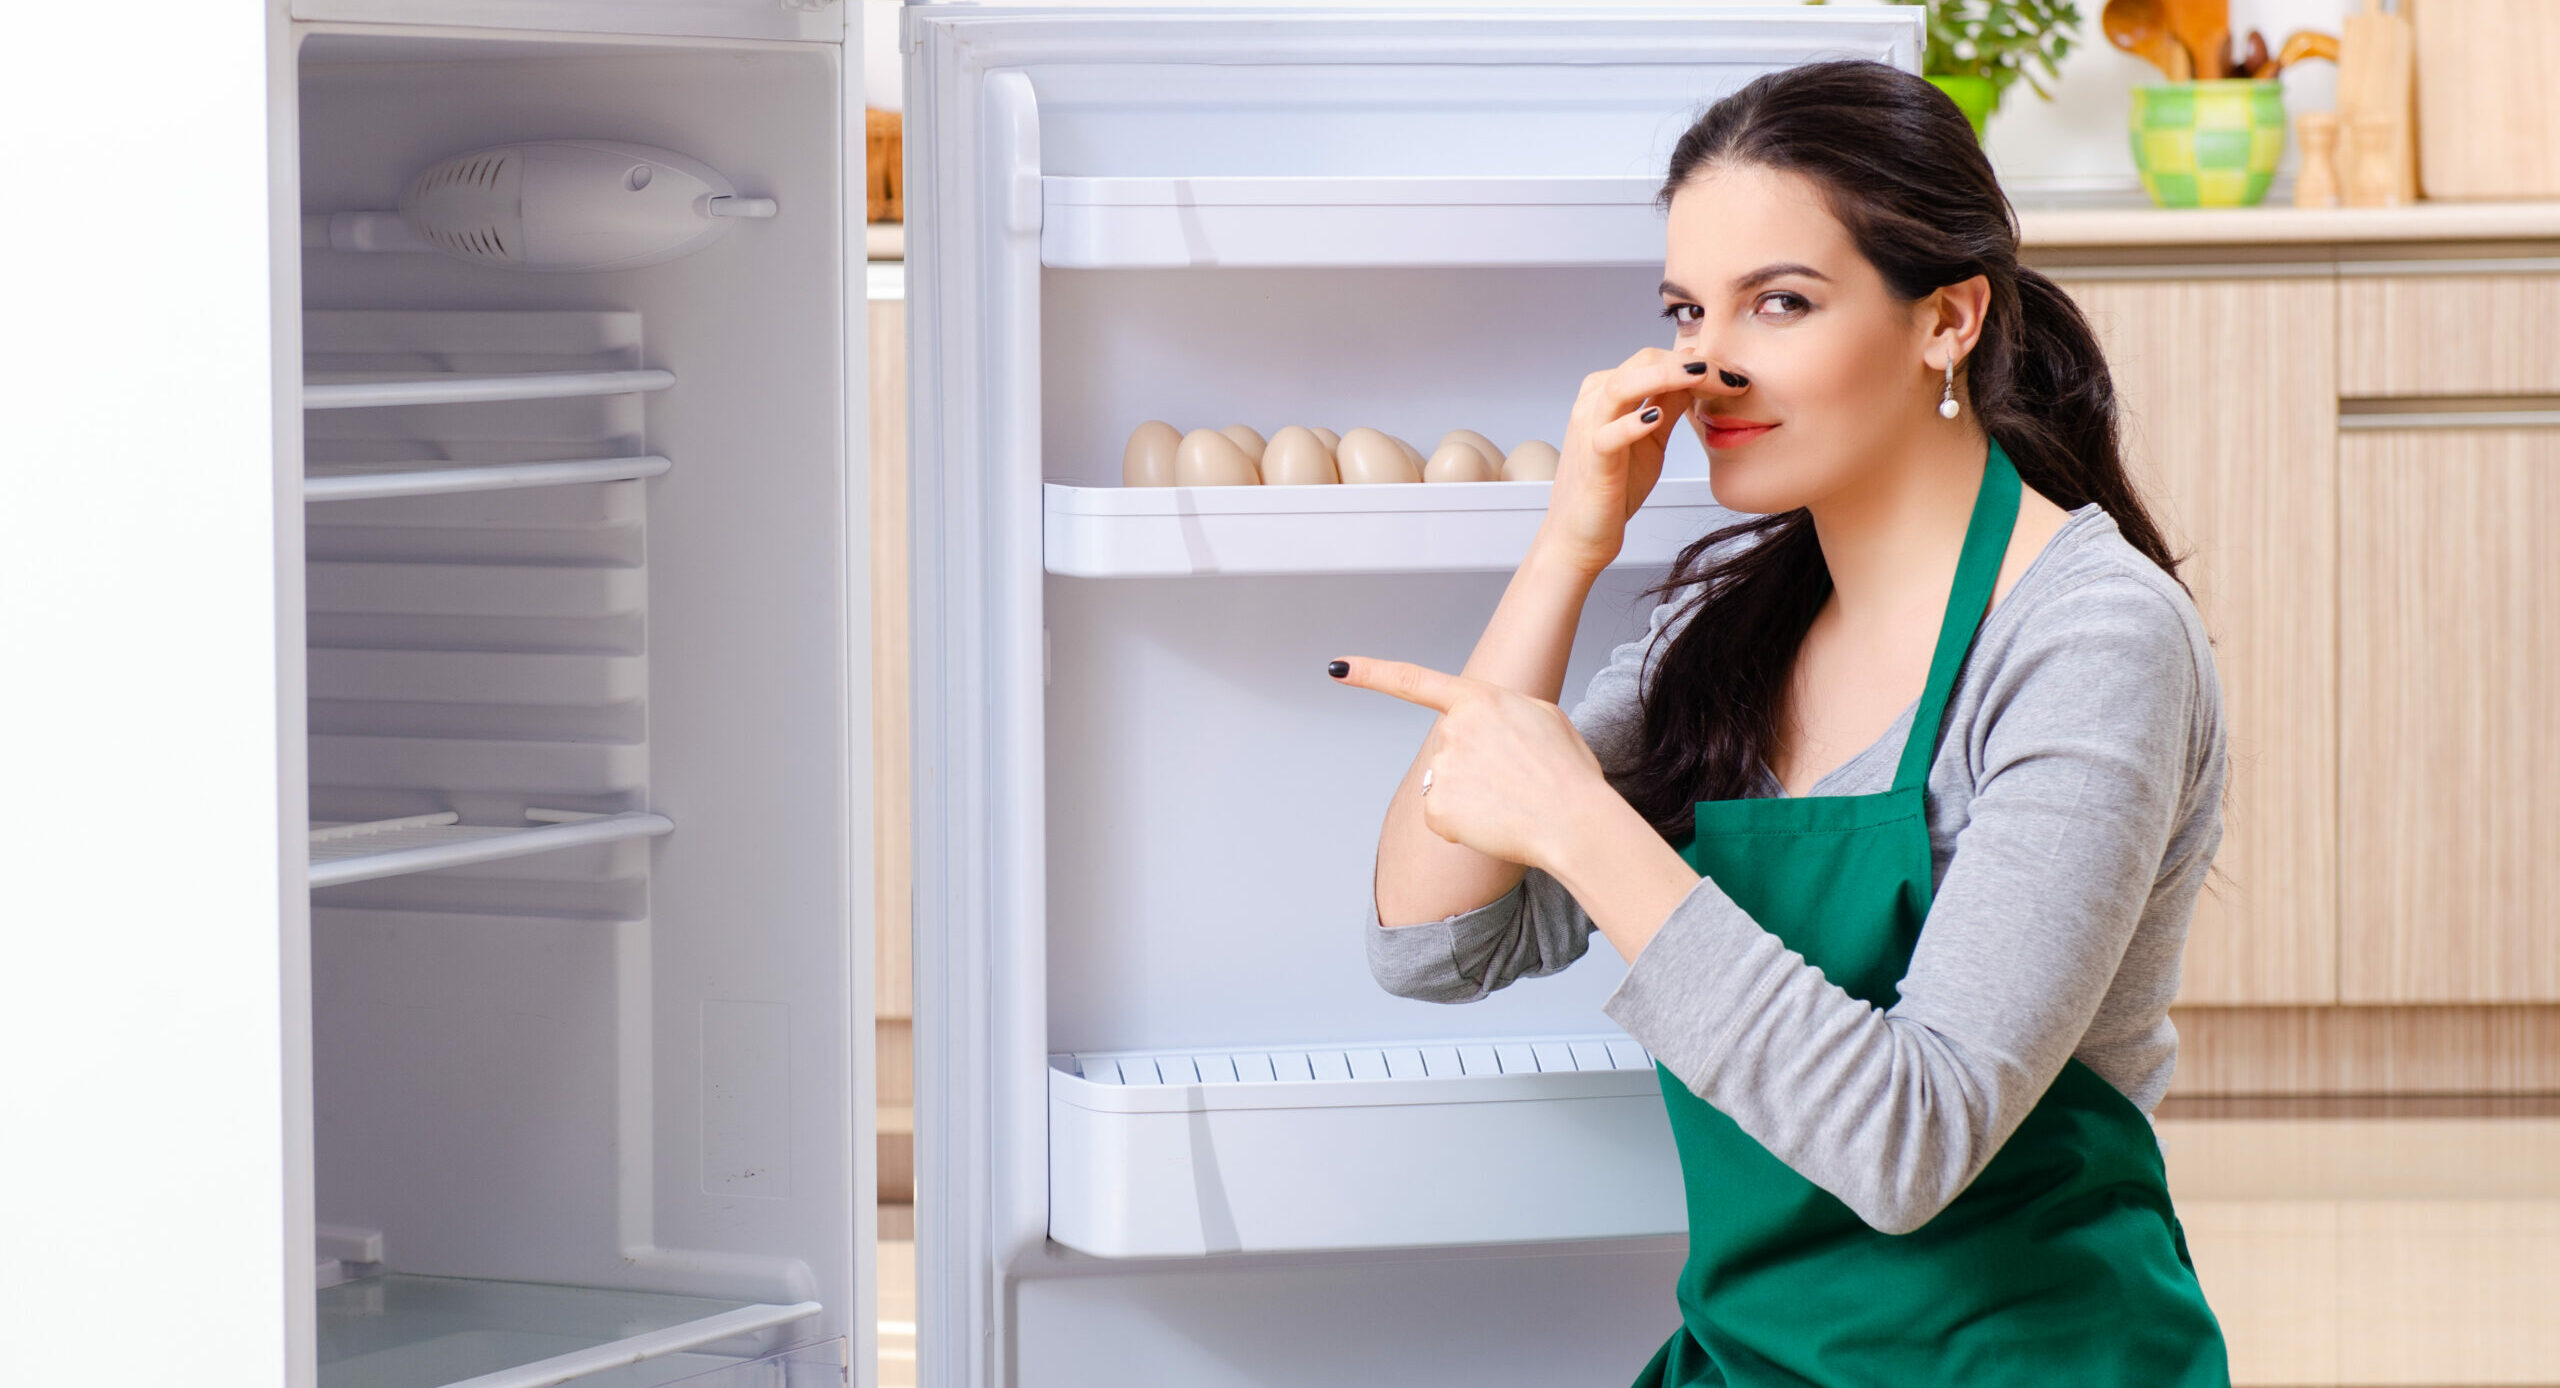 Cleaning and maintenance of the refrigerator